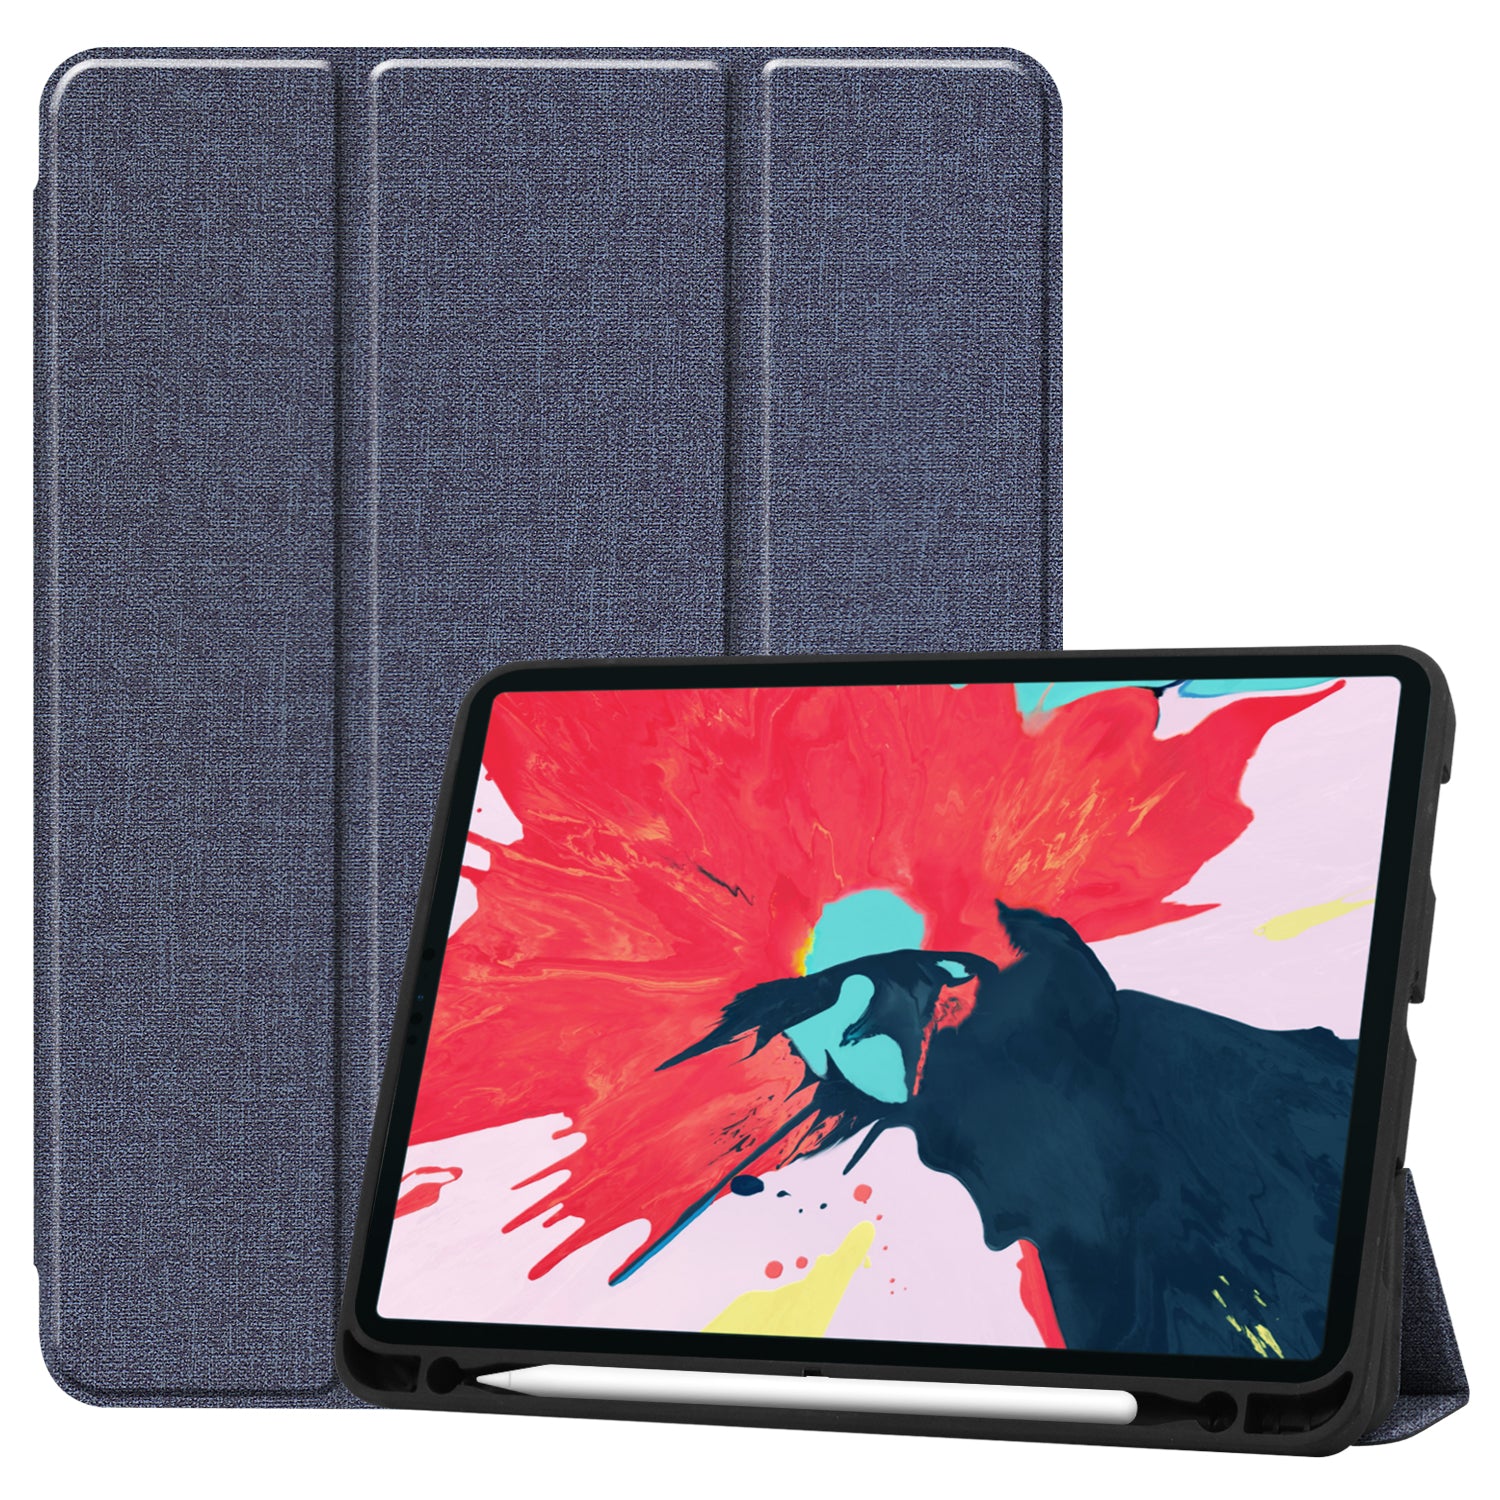 11 inch Foldable TPU Protective Shell Tablet Cover Case Shatter-resistant with Pen Slot for iPadPro blue ZopiStyle